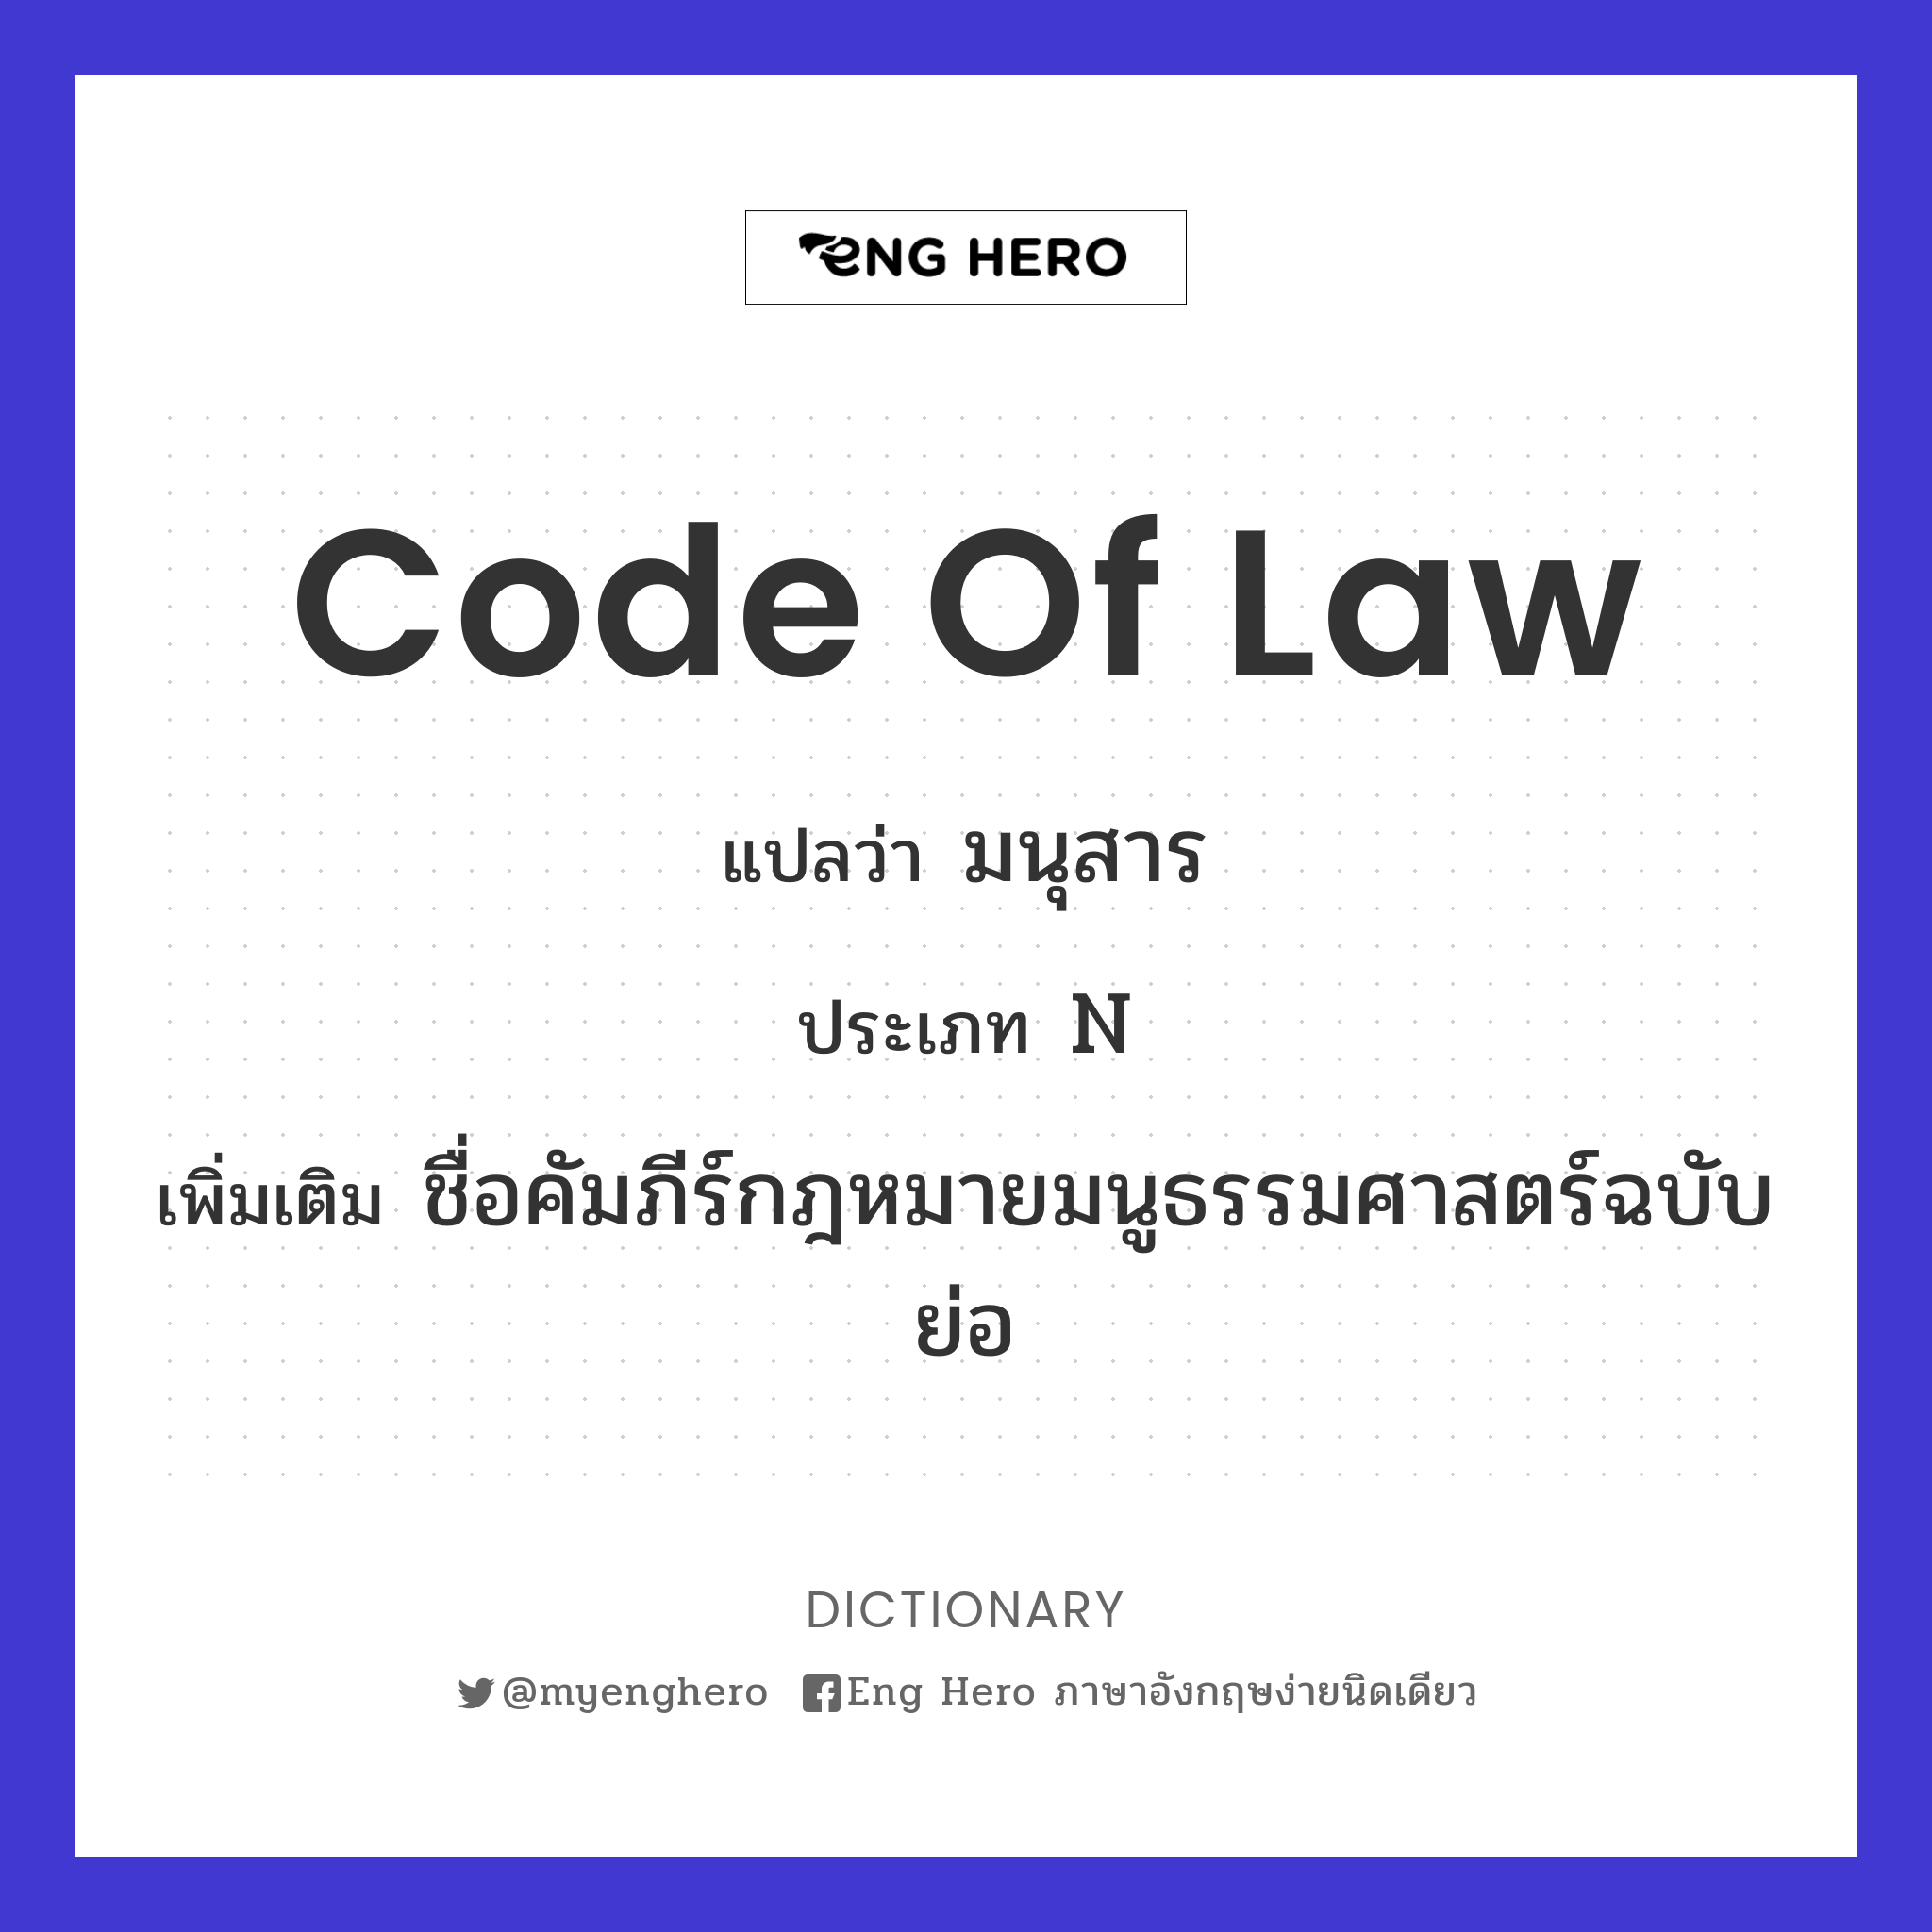 Code of law